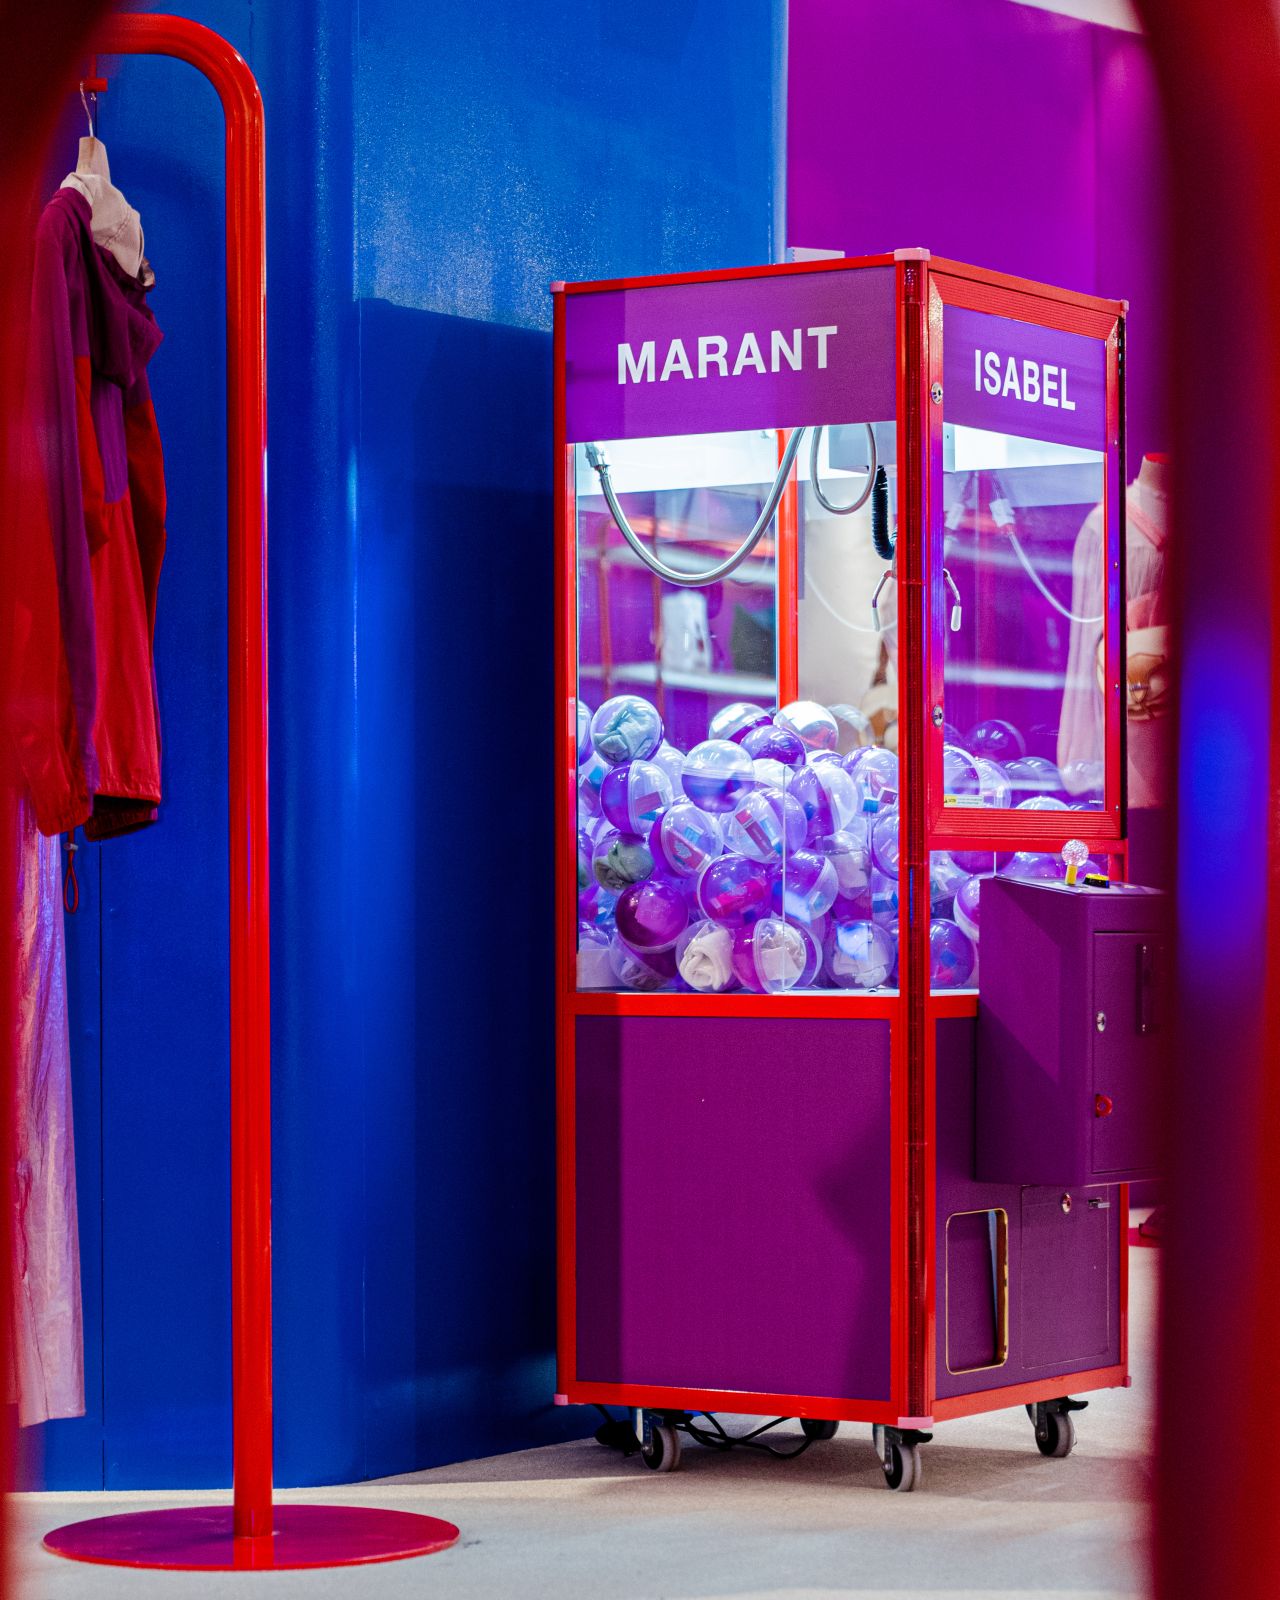 The Lucky Club, A Temporary Pop-Up Store By Isabel Marant